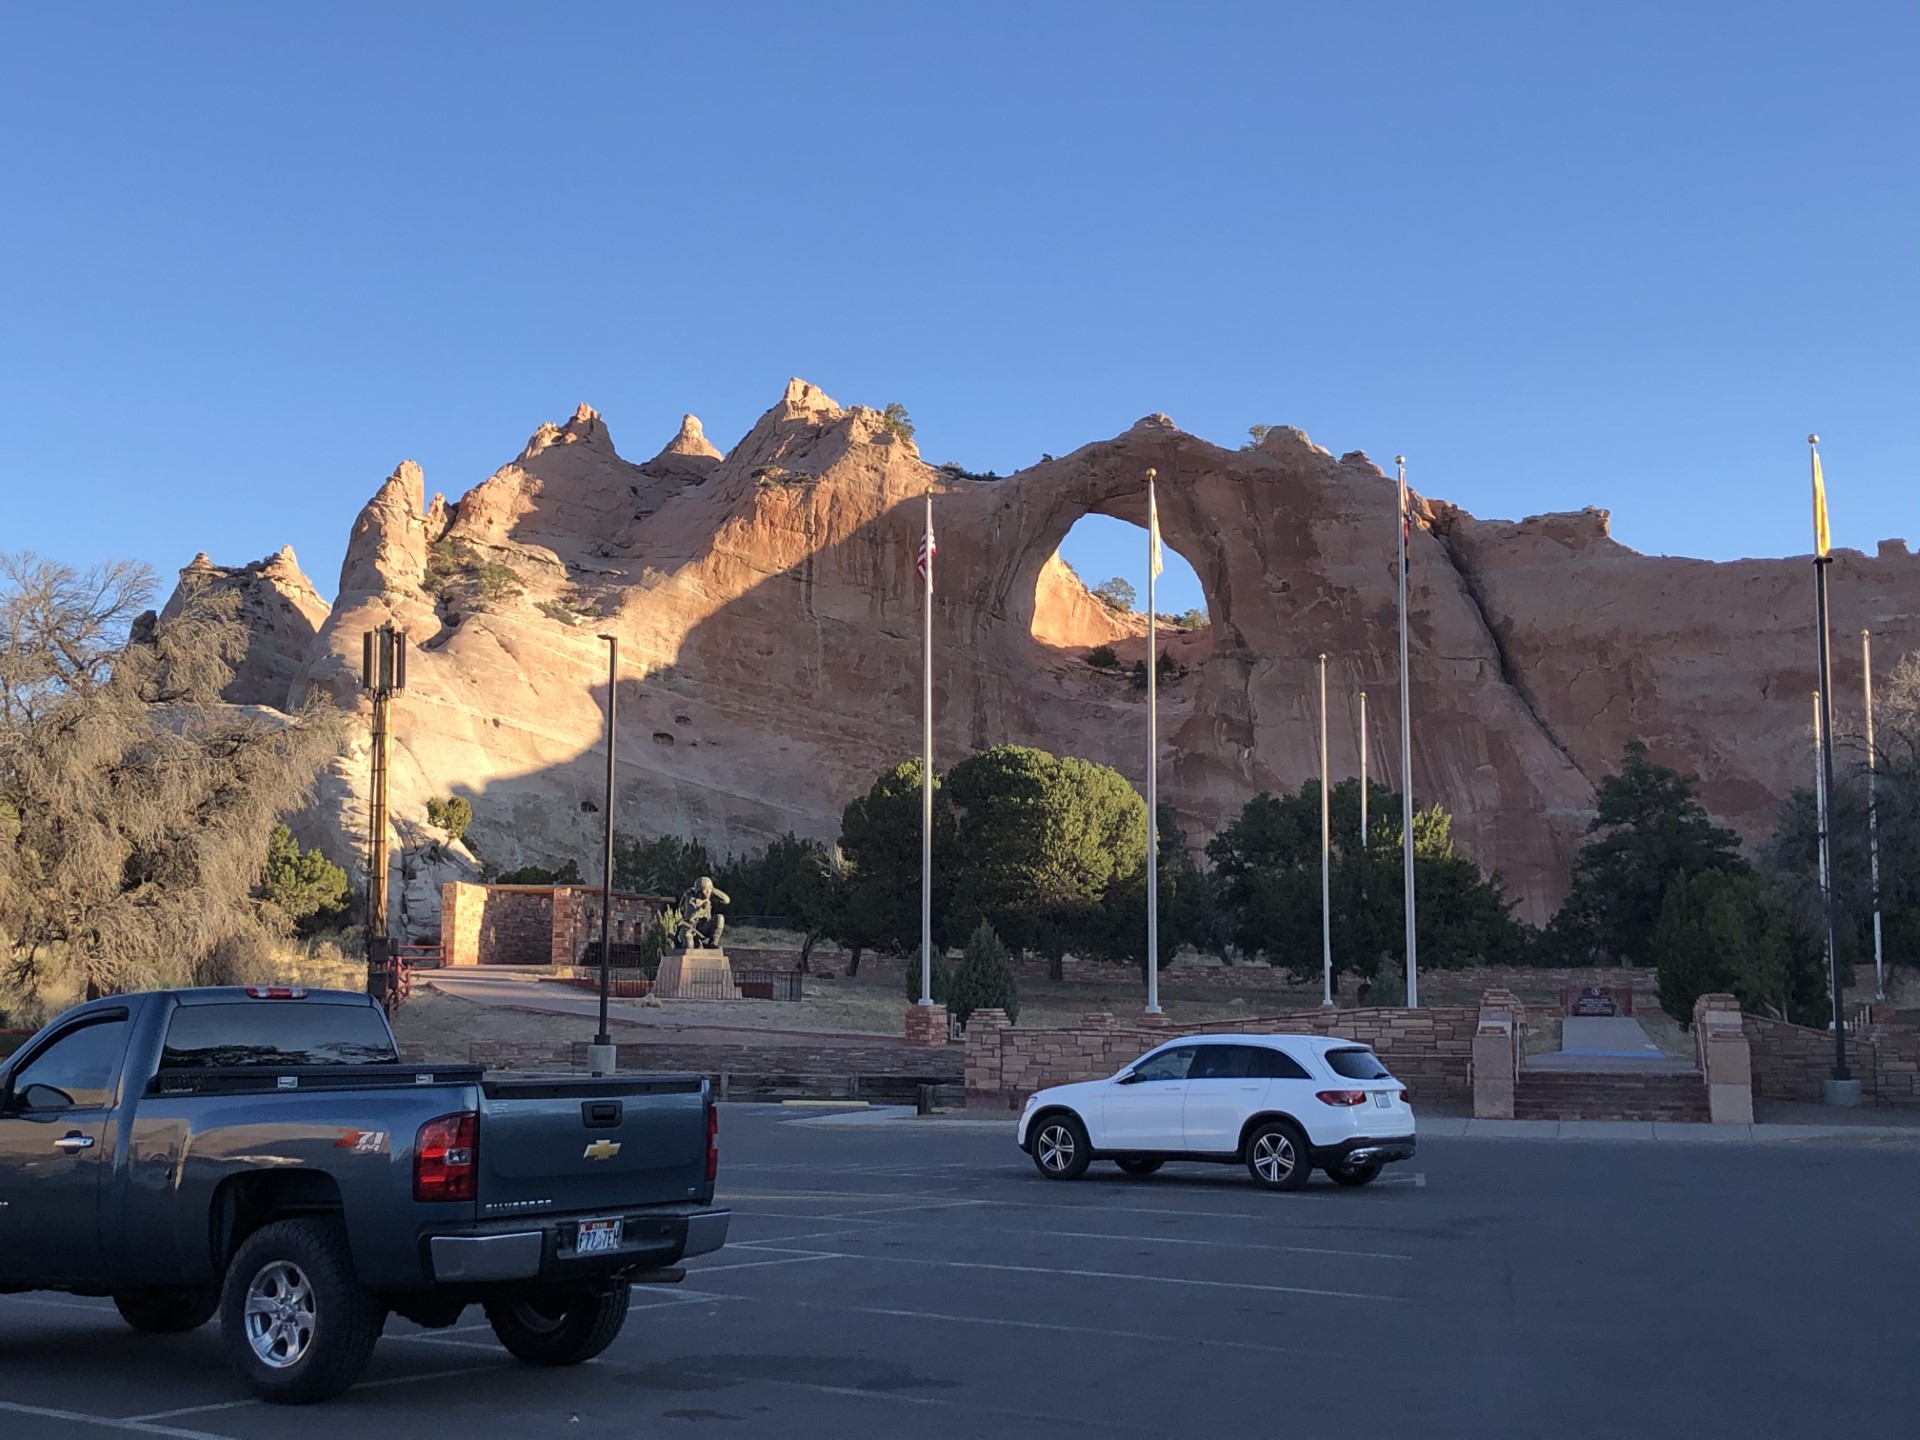 After several meetings in New Mexico, Barbara drove to the headquarters of the Navajo Nation in Window Rock, Arizona where she continued working with current and potential Fielding students, alums and key Indigenous leaders.